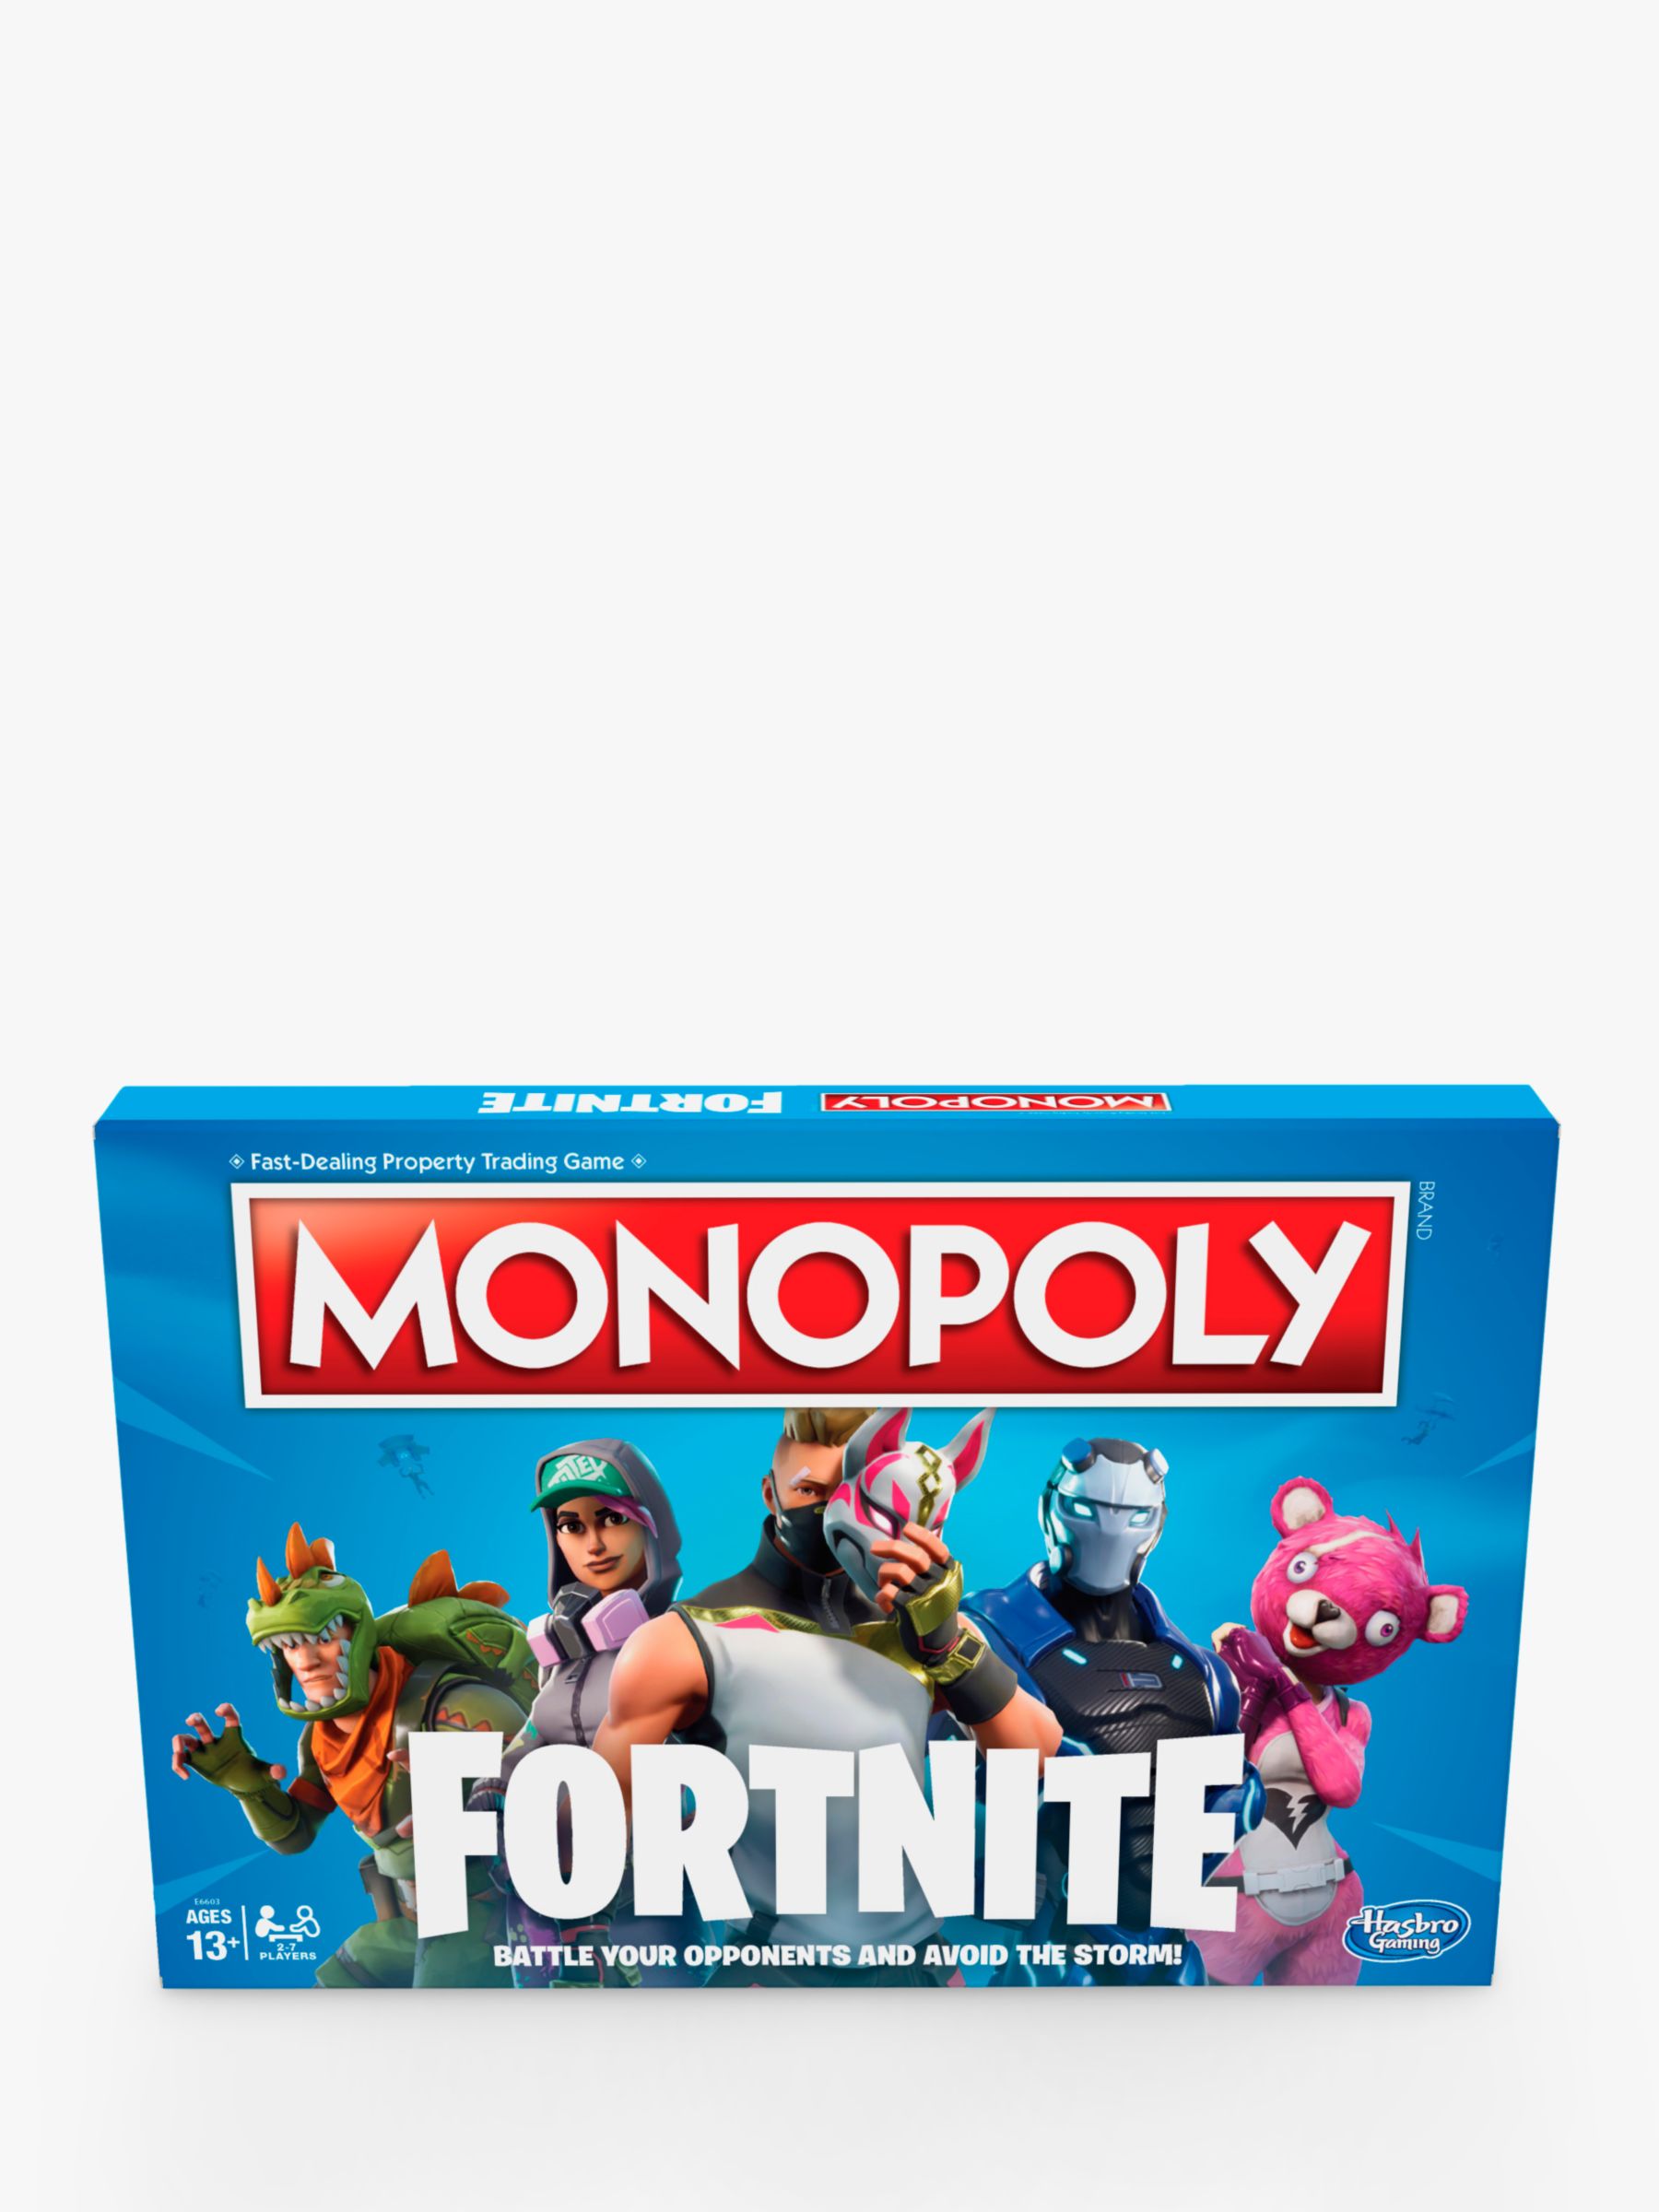 where can i get fortnite monopoly